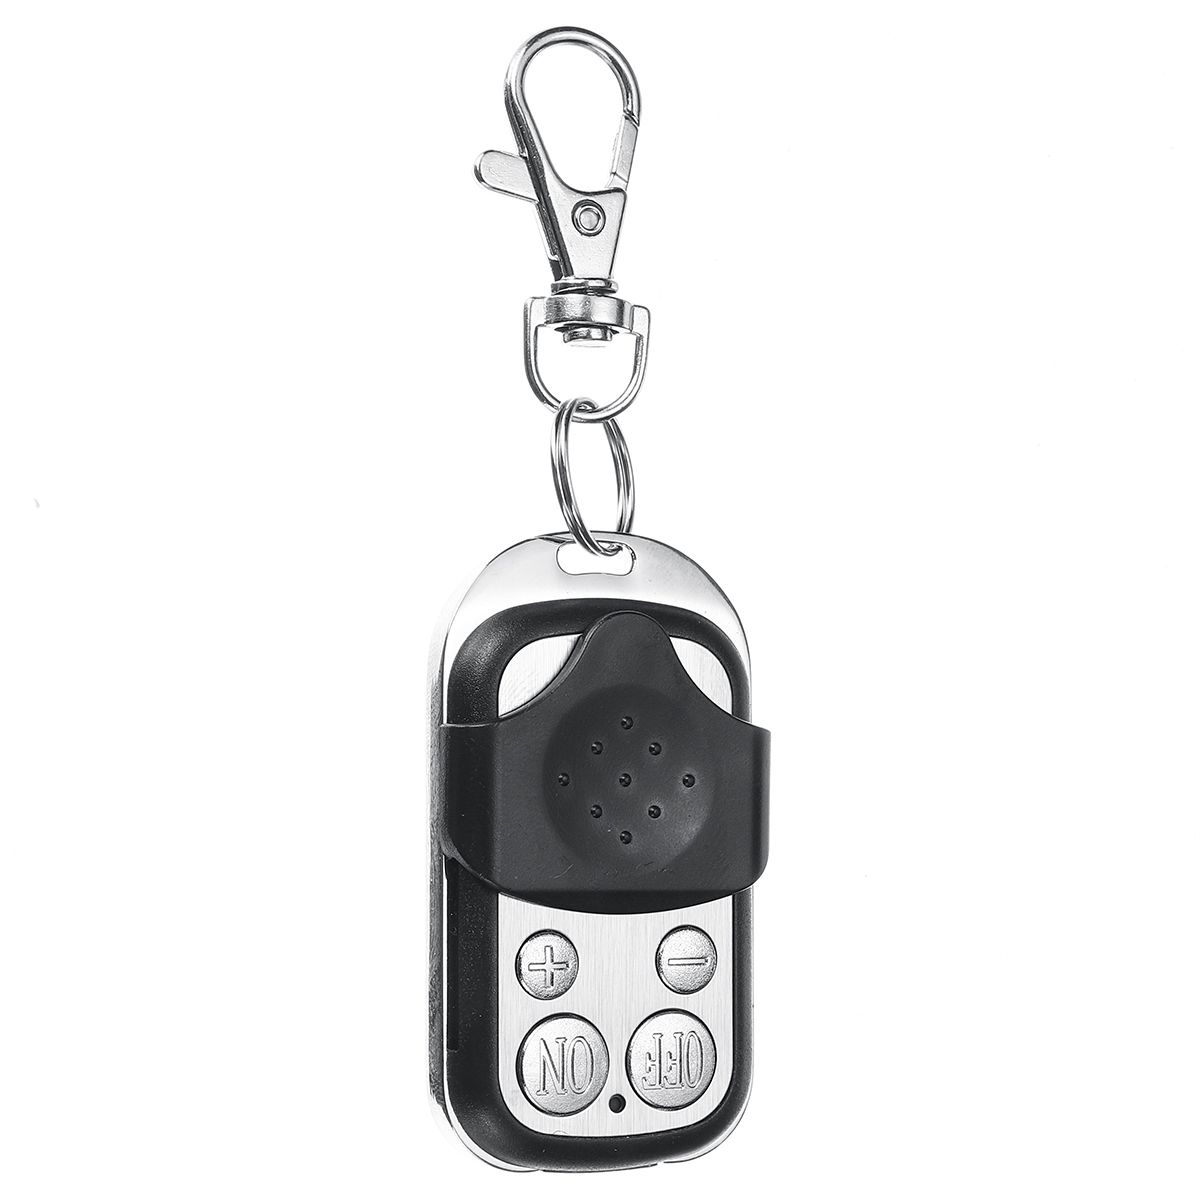 Parking-Heater-Car-Heater-Four-button-Silver-Remote-Control-Without-Battery-1481293